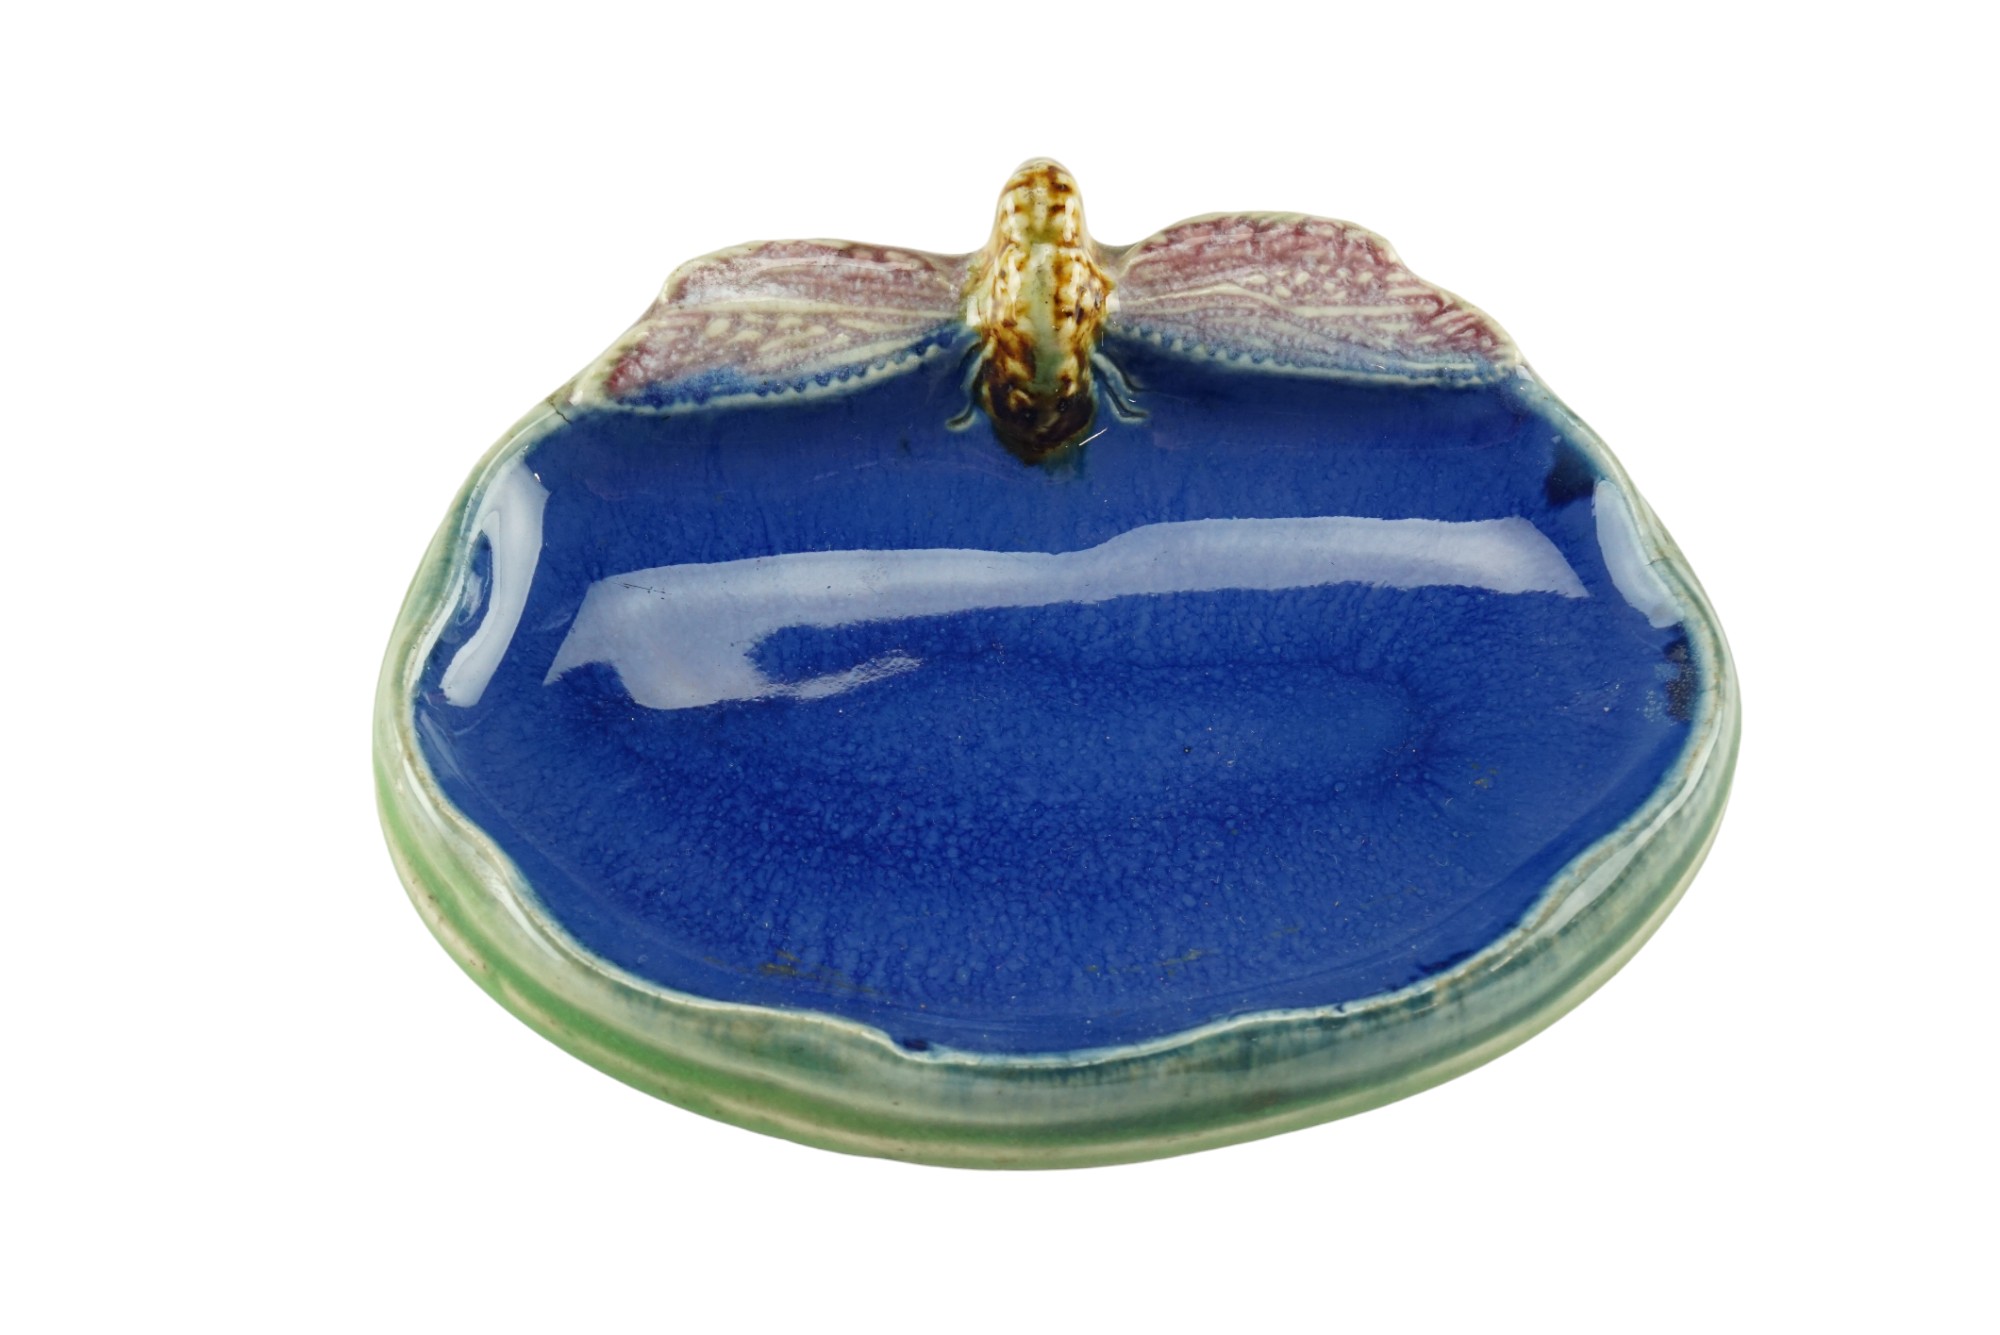 A Royal Doulton majolica soap dish modelled as a dragonfly perched on the edge of a pond,